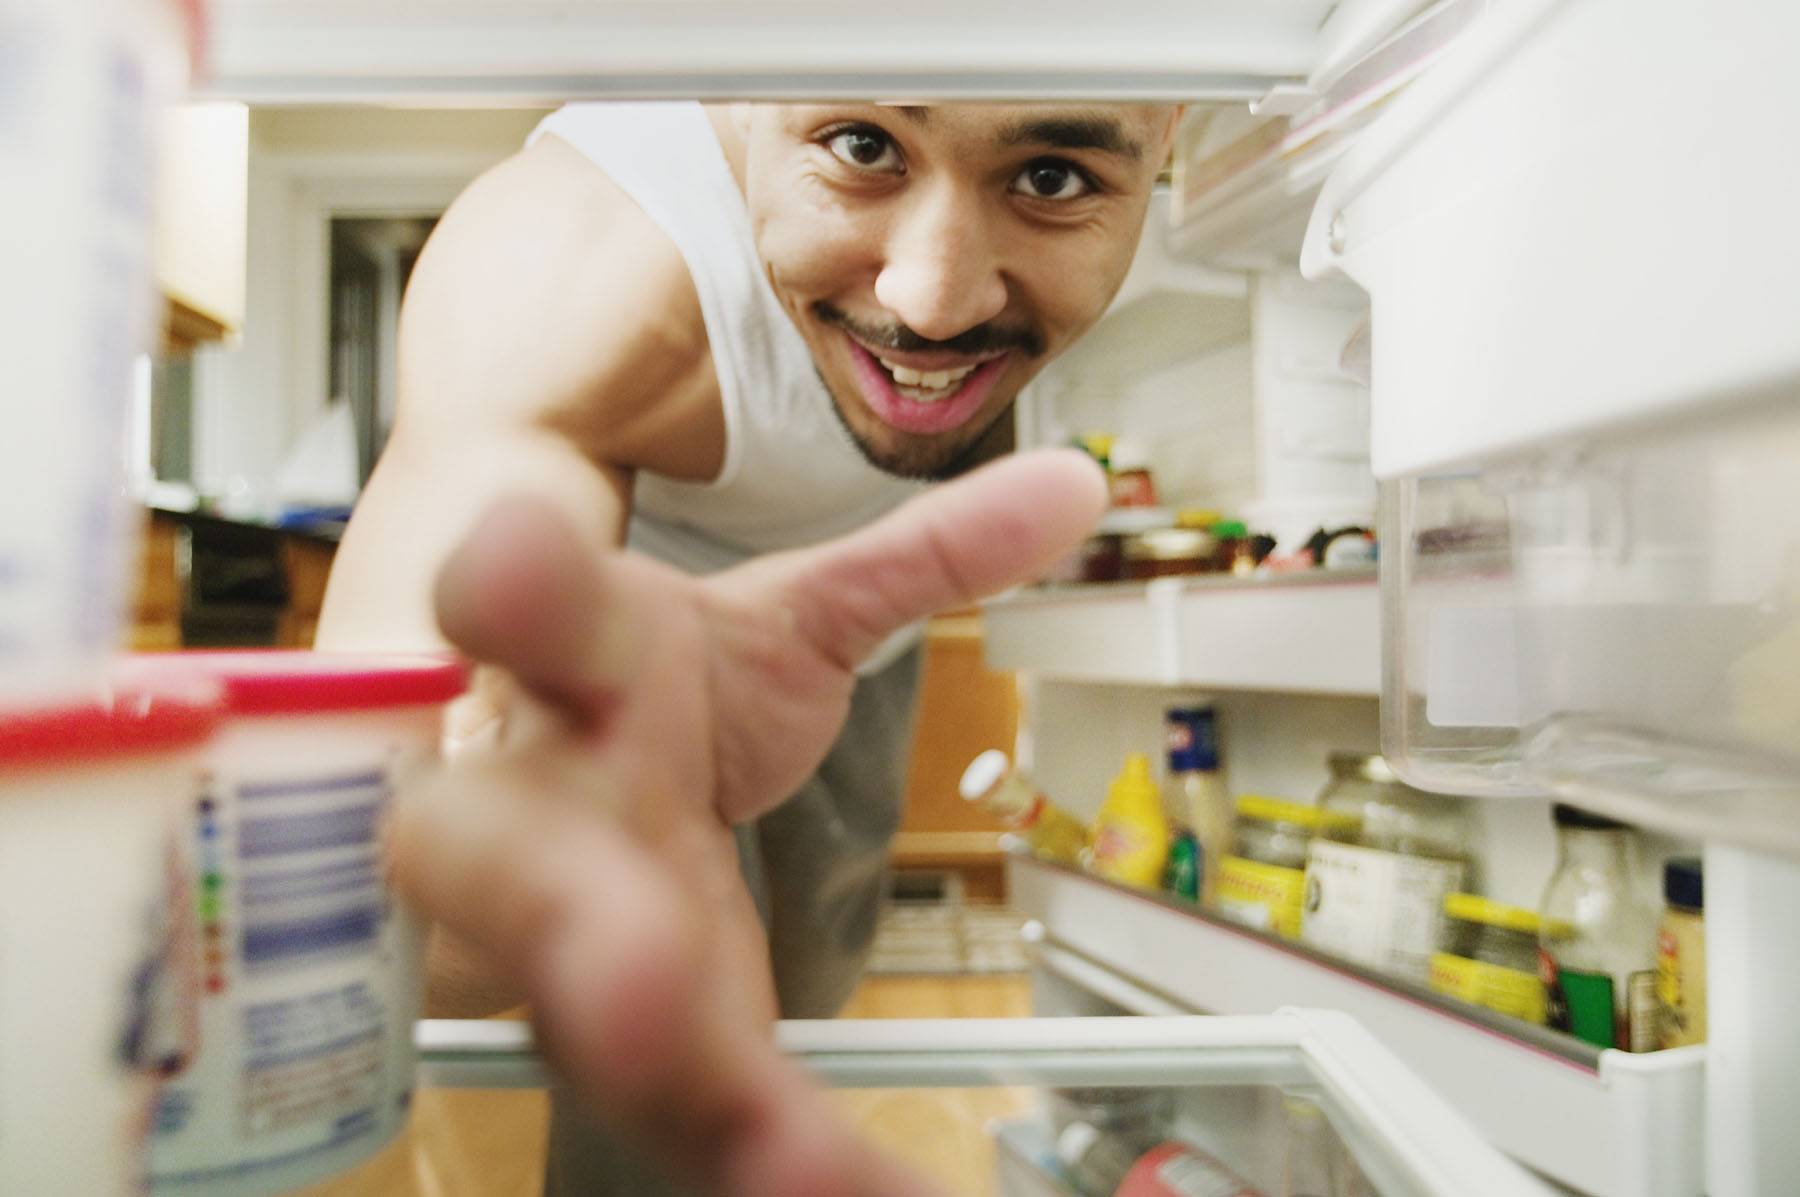 What’s in Your Fridge?